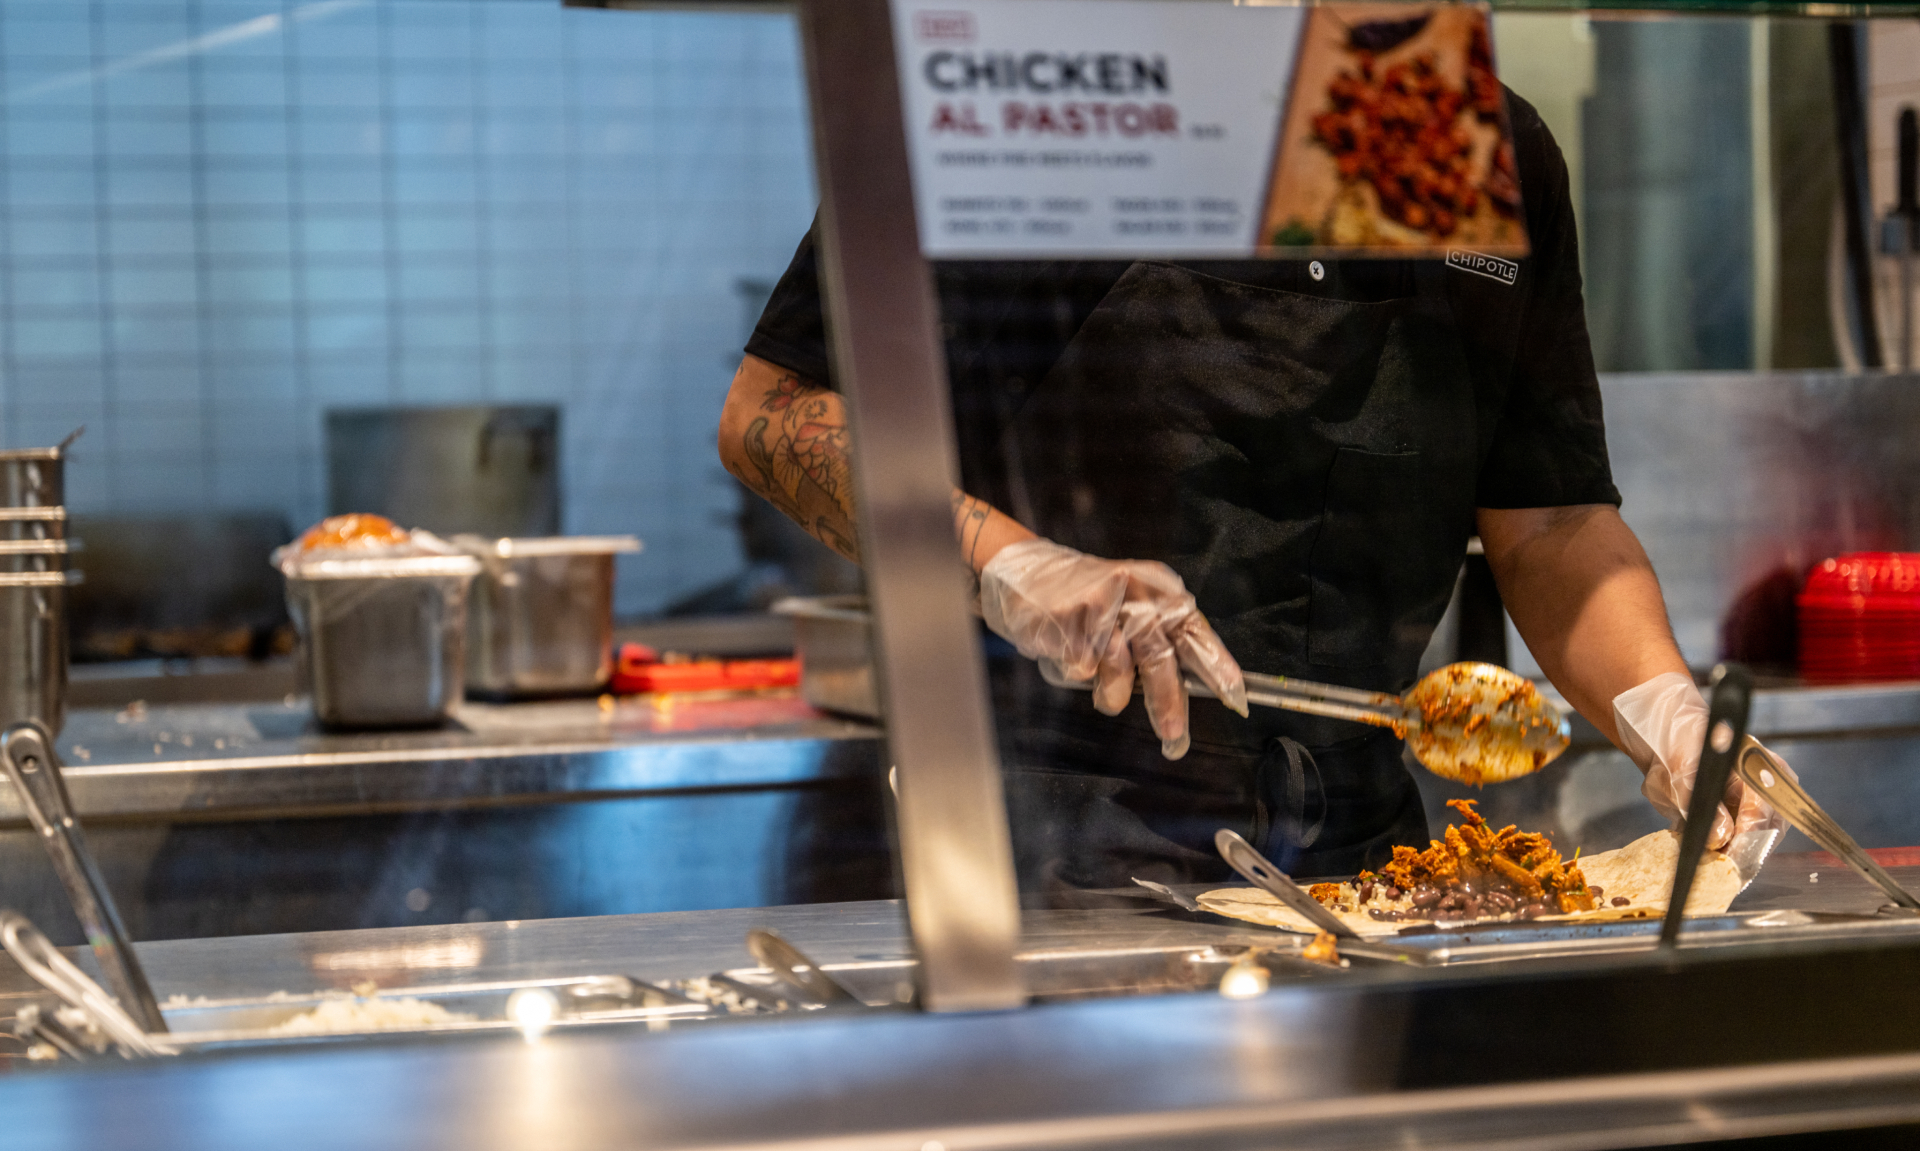 An employee prepares food at a Chipotle Mexican Grill restaurant on April 26, 2023 in Austin, Texas.